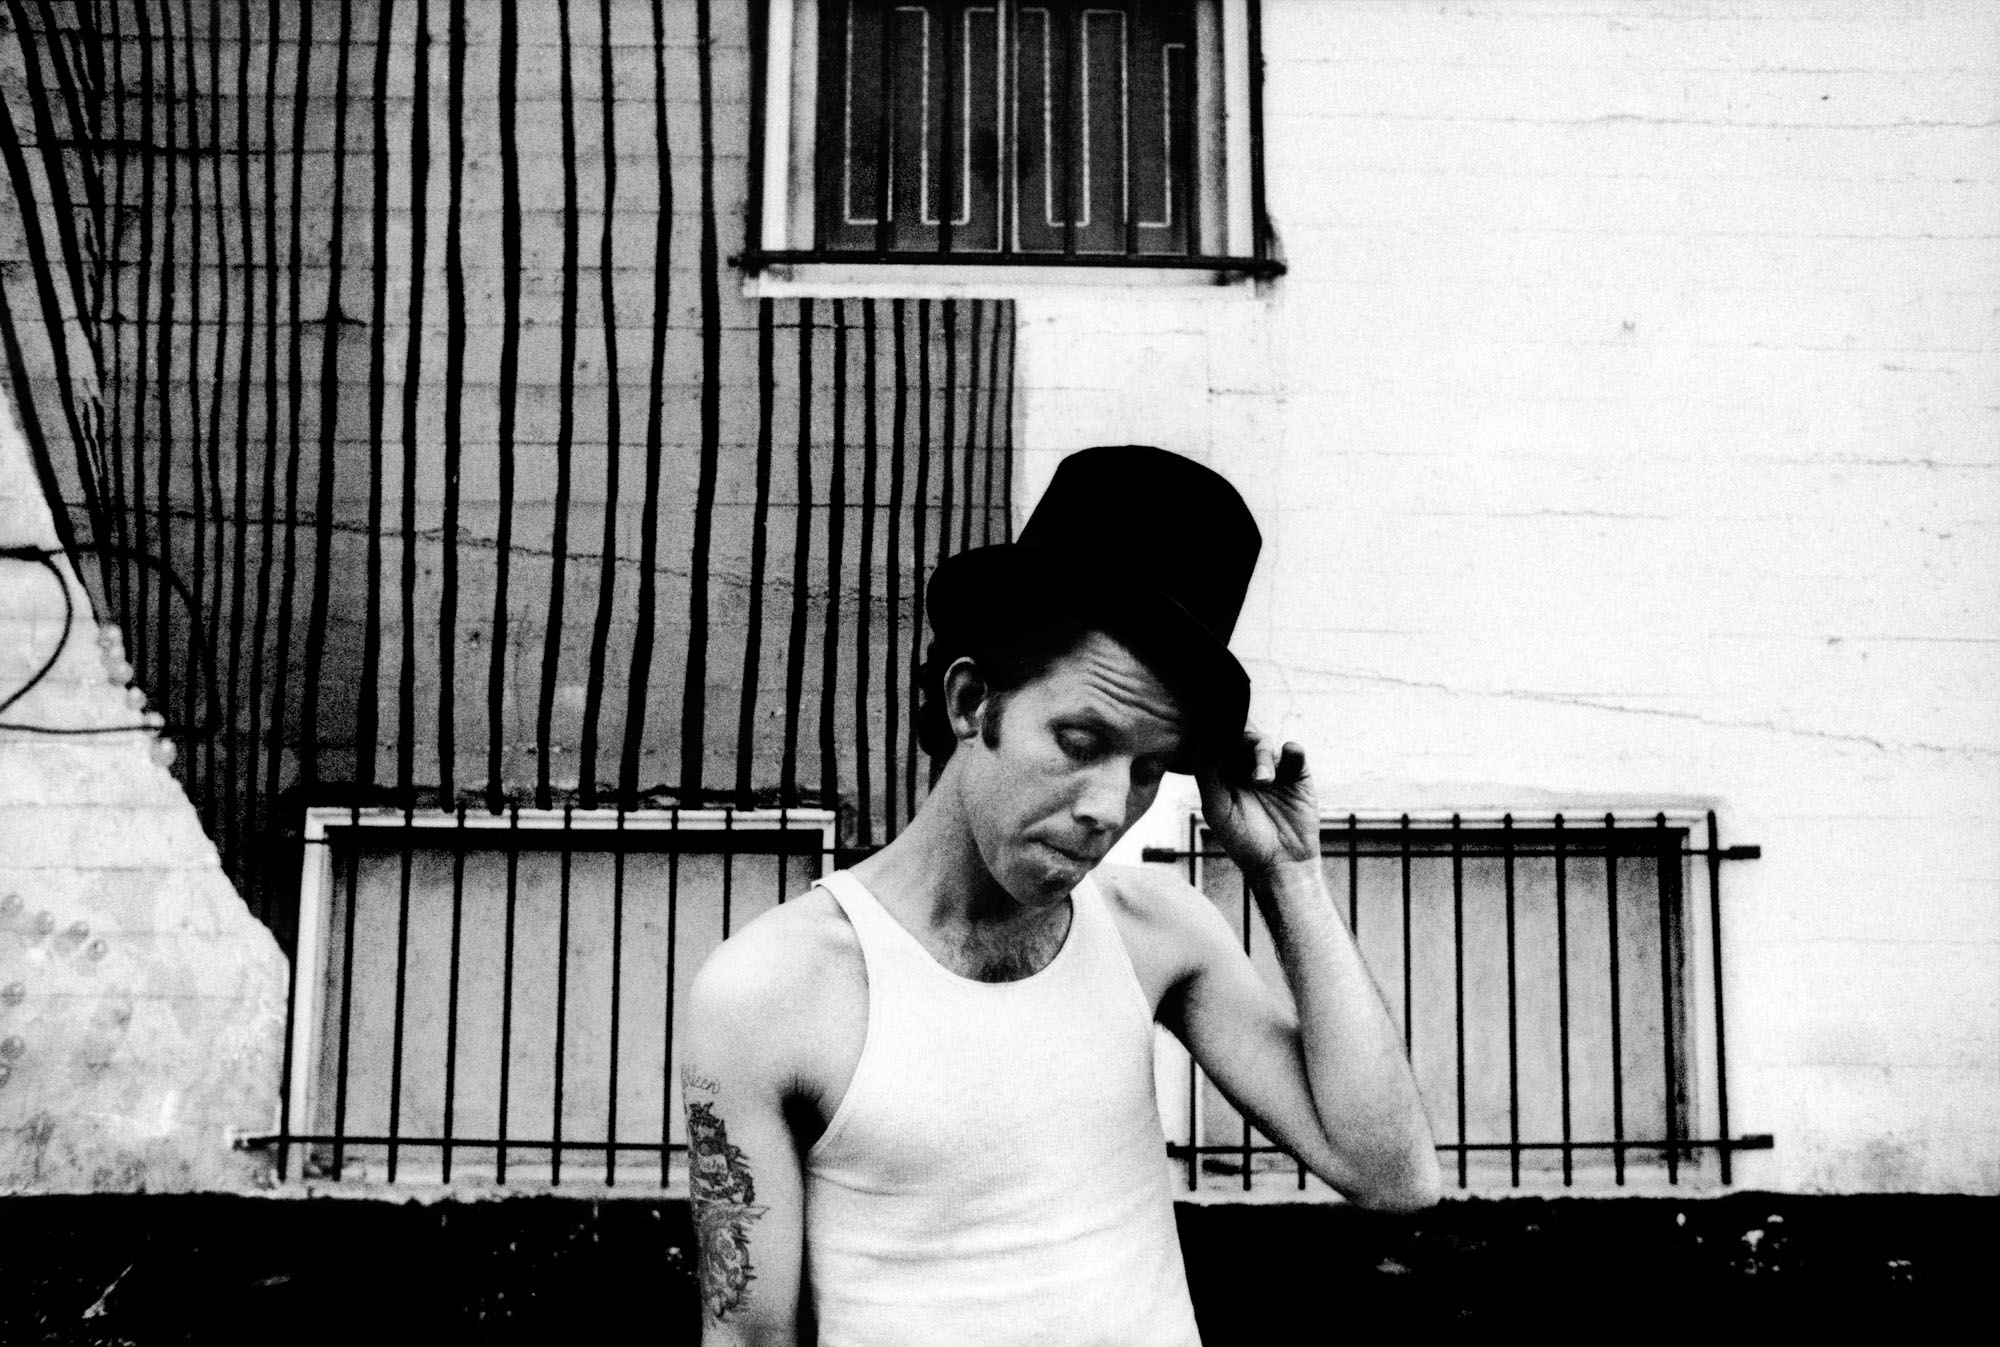 FLOOD - Yesterday Is Here: Tom Waits' Disruption of the Notion of